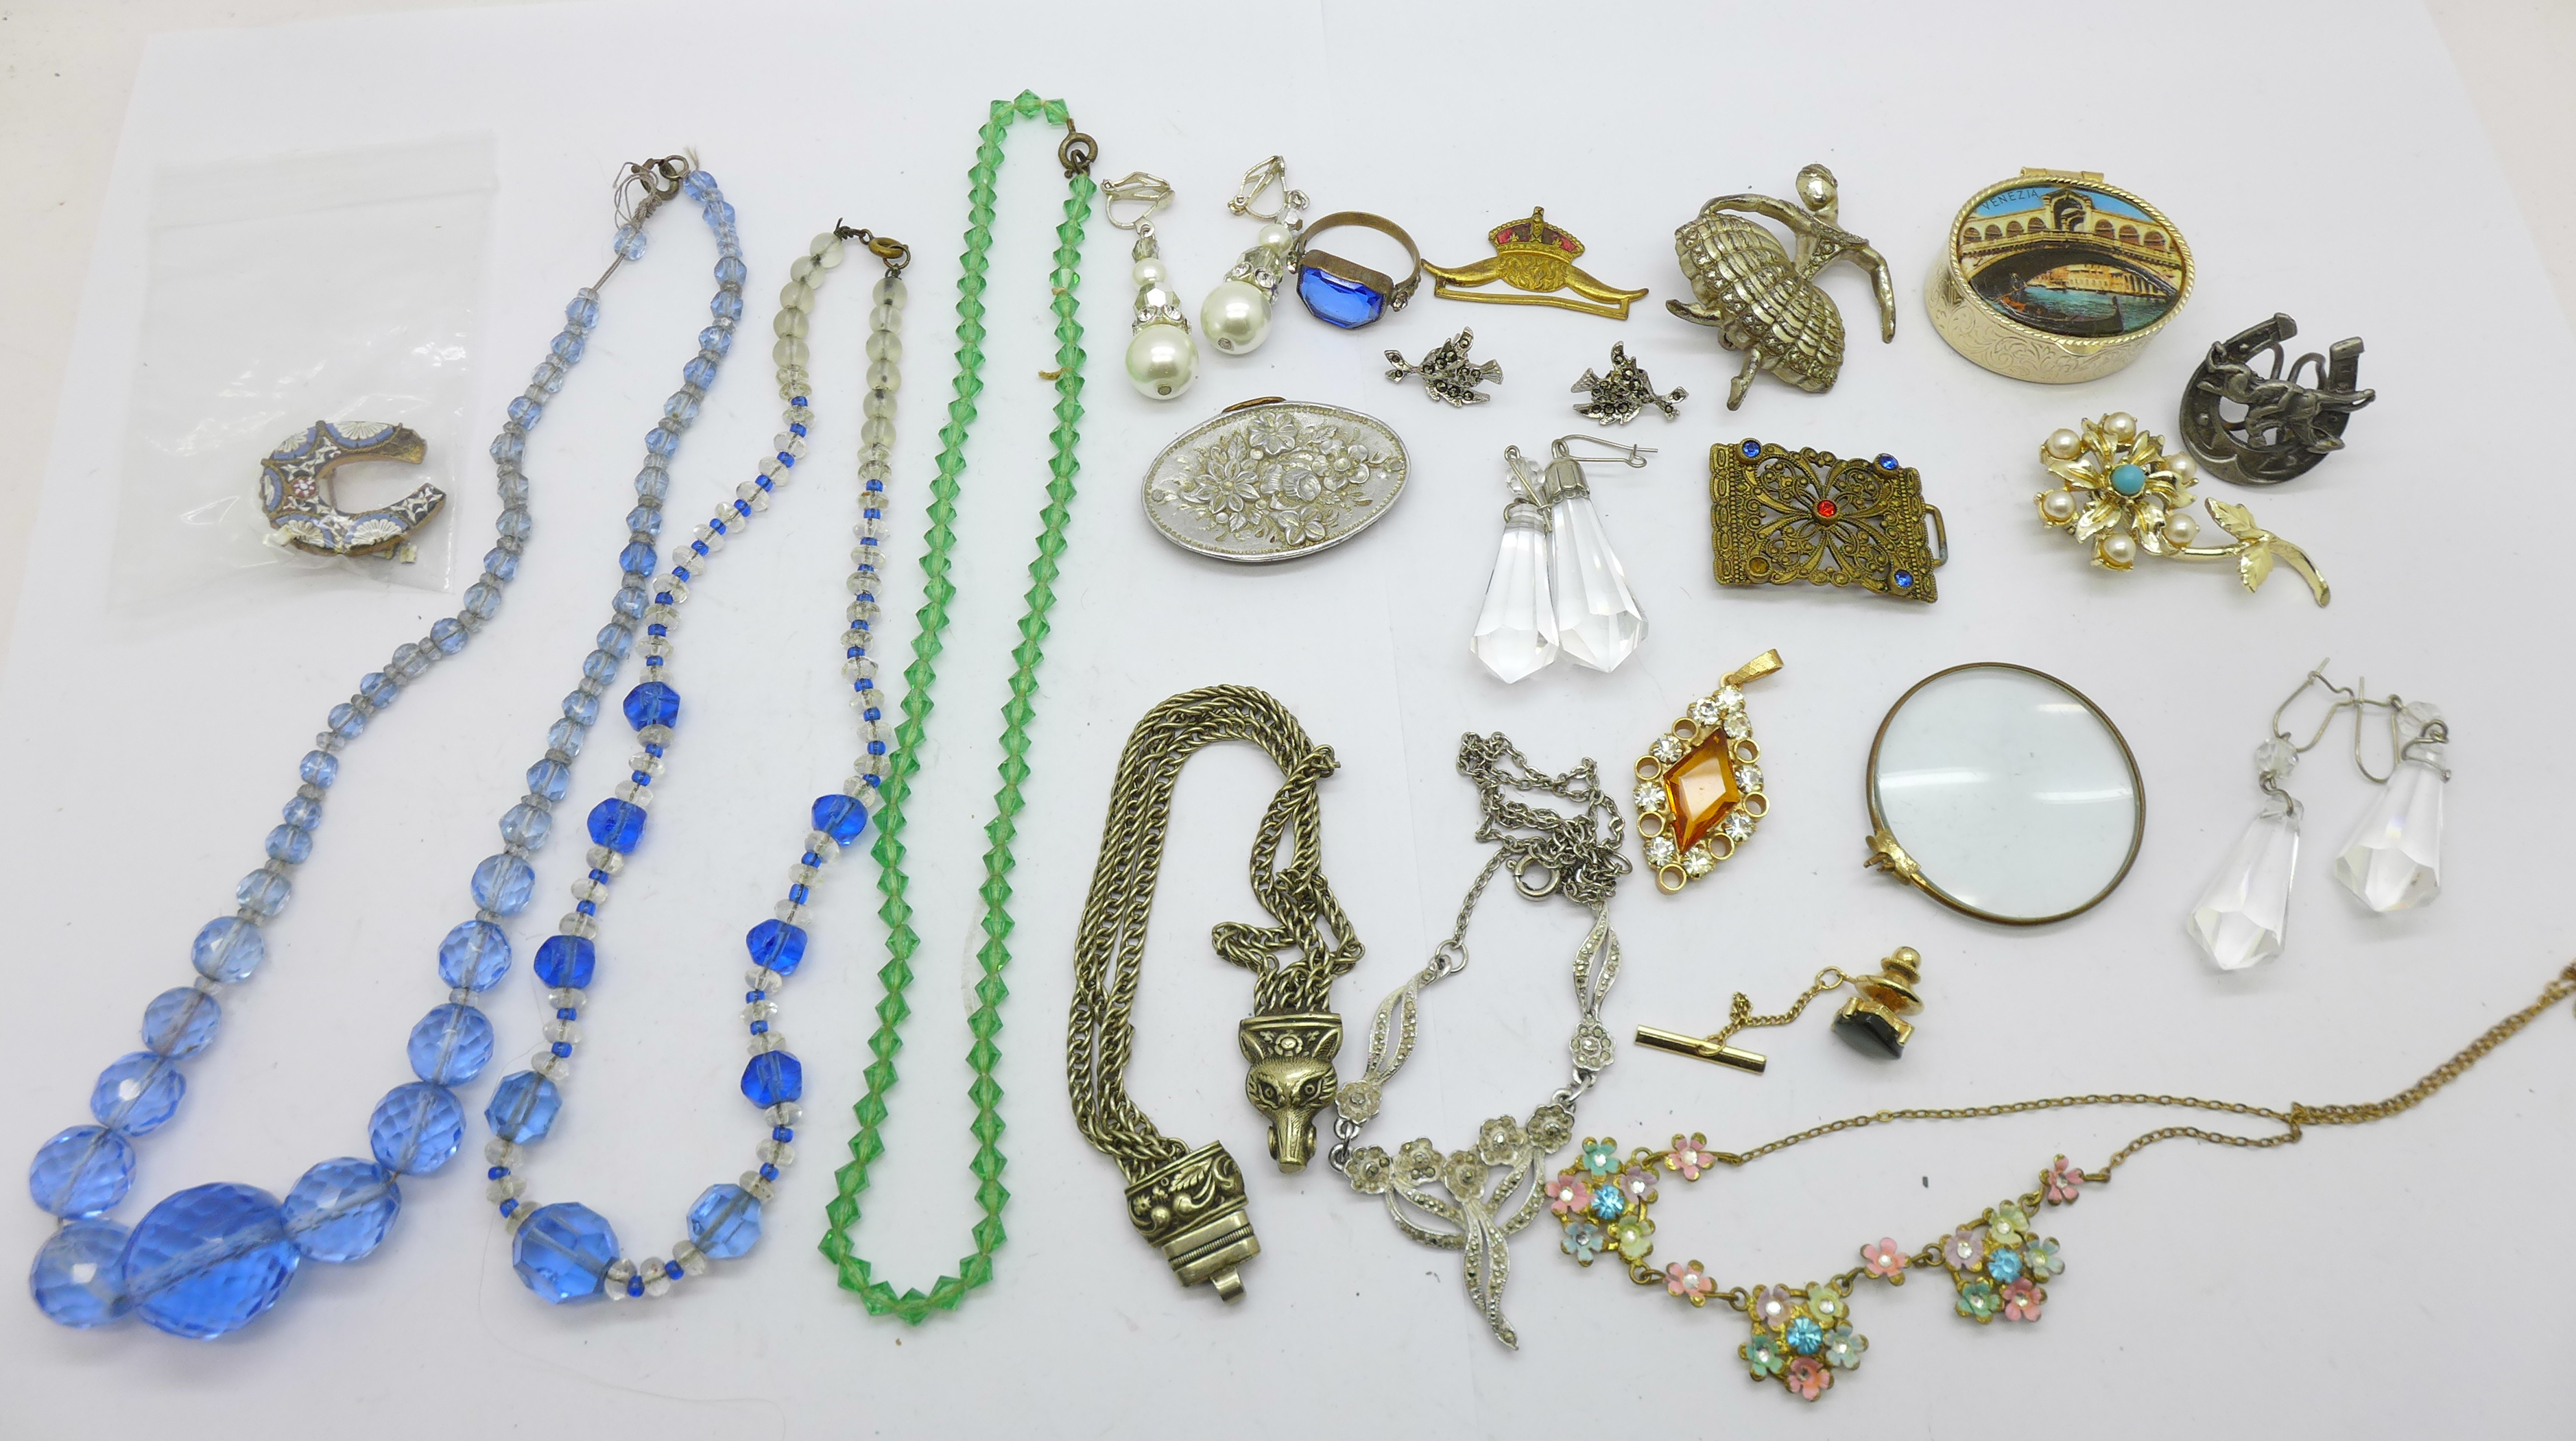 Vintage jewellery, etc., including faceted bead necklaces and drop earrings